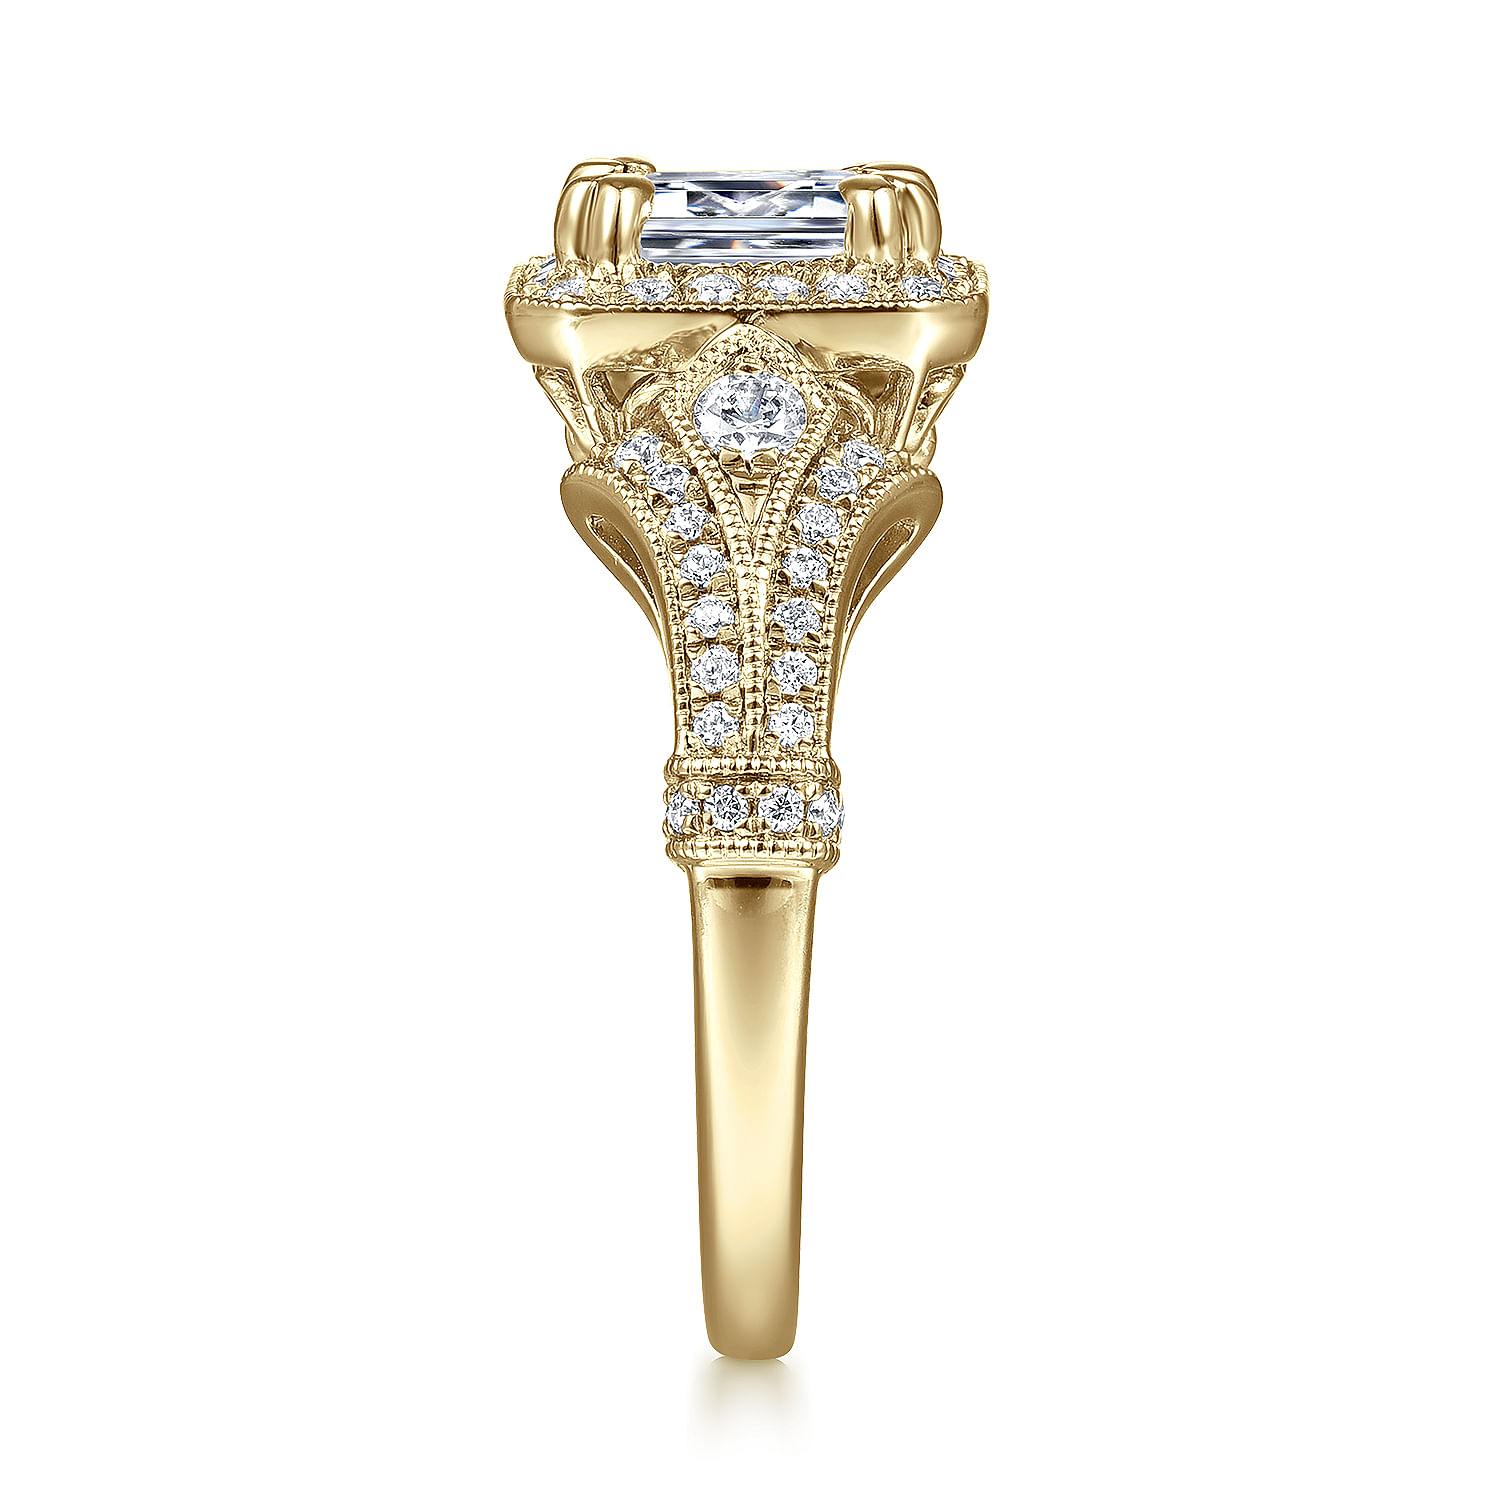 Vintage Inspired 14K Yellow Gold Halo Emerald Cut Diamond Engagement Ring